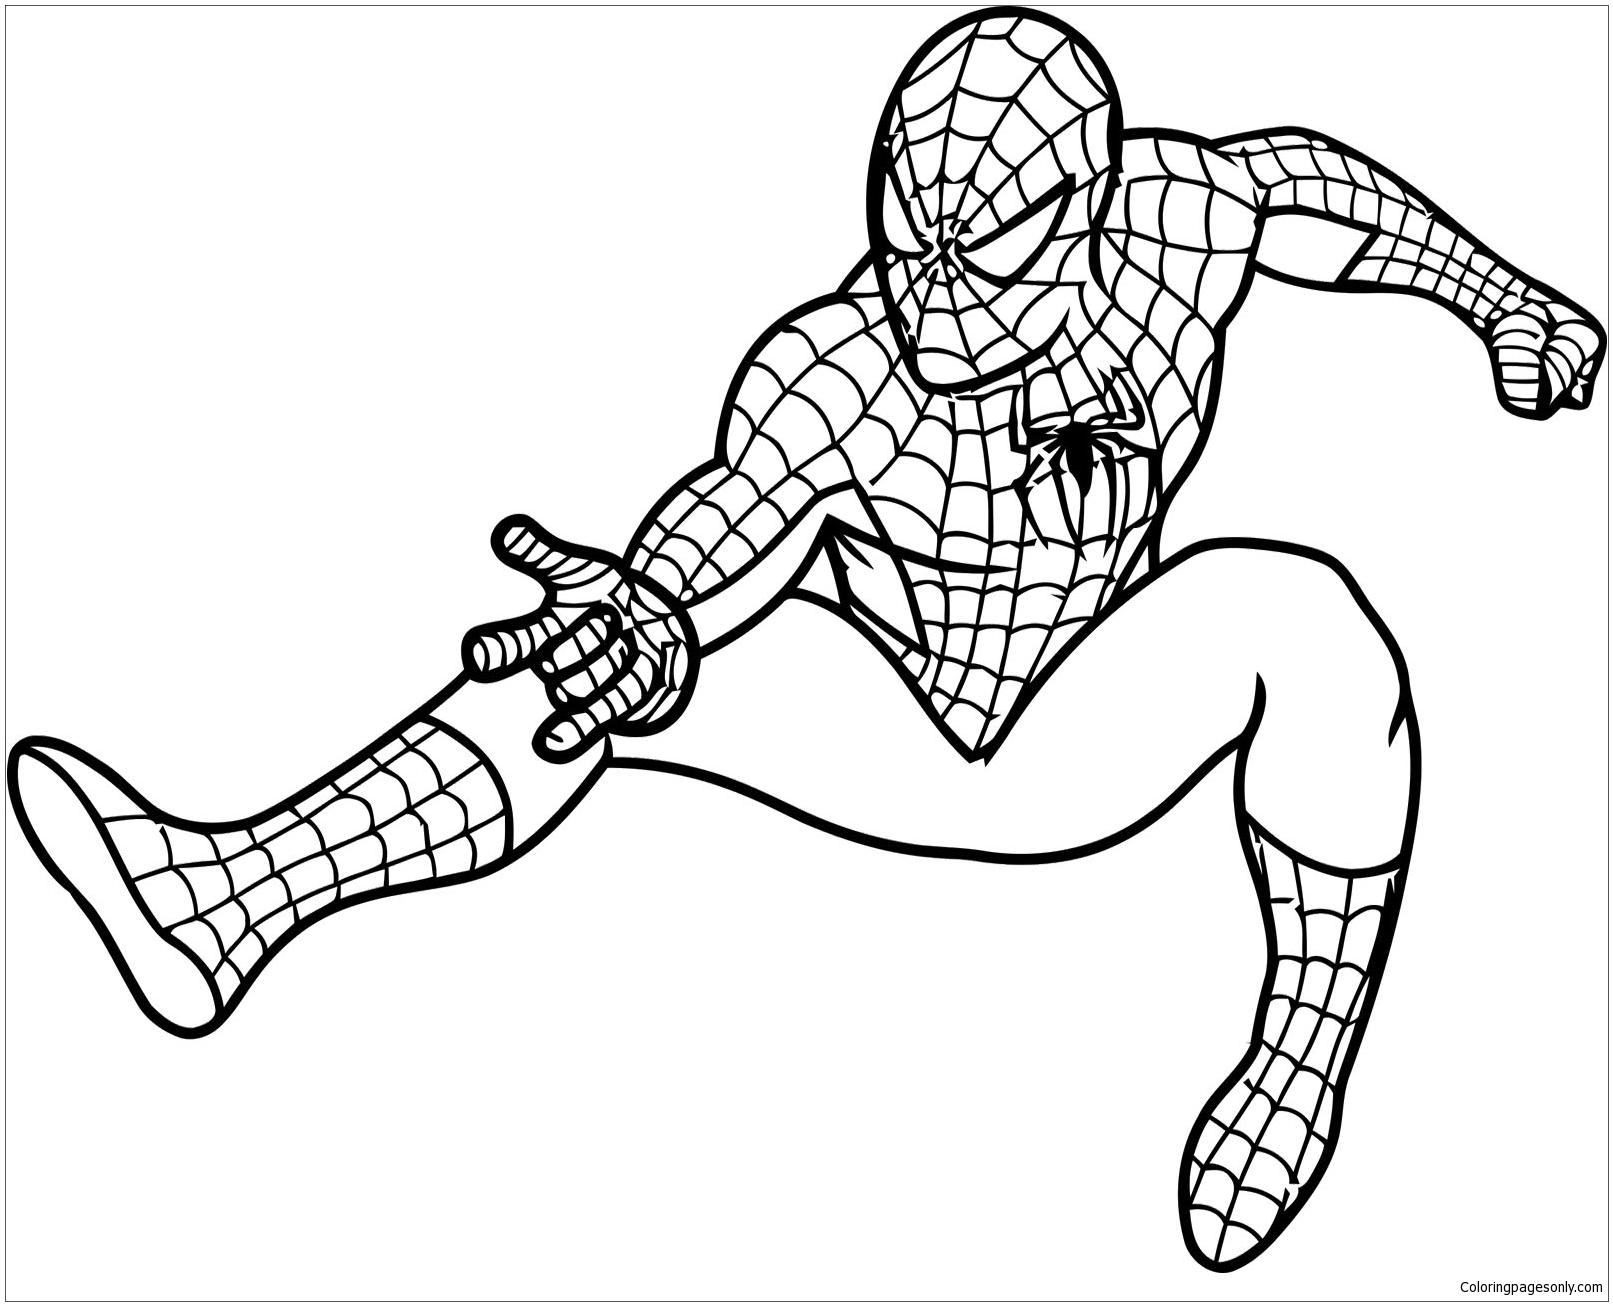 How To Draw Spiderman with pencil - KIDS COLORING TV - PaintingTube